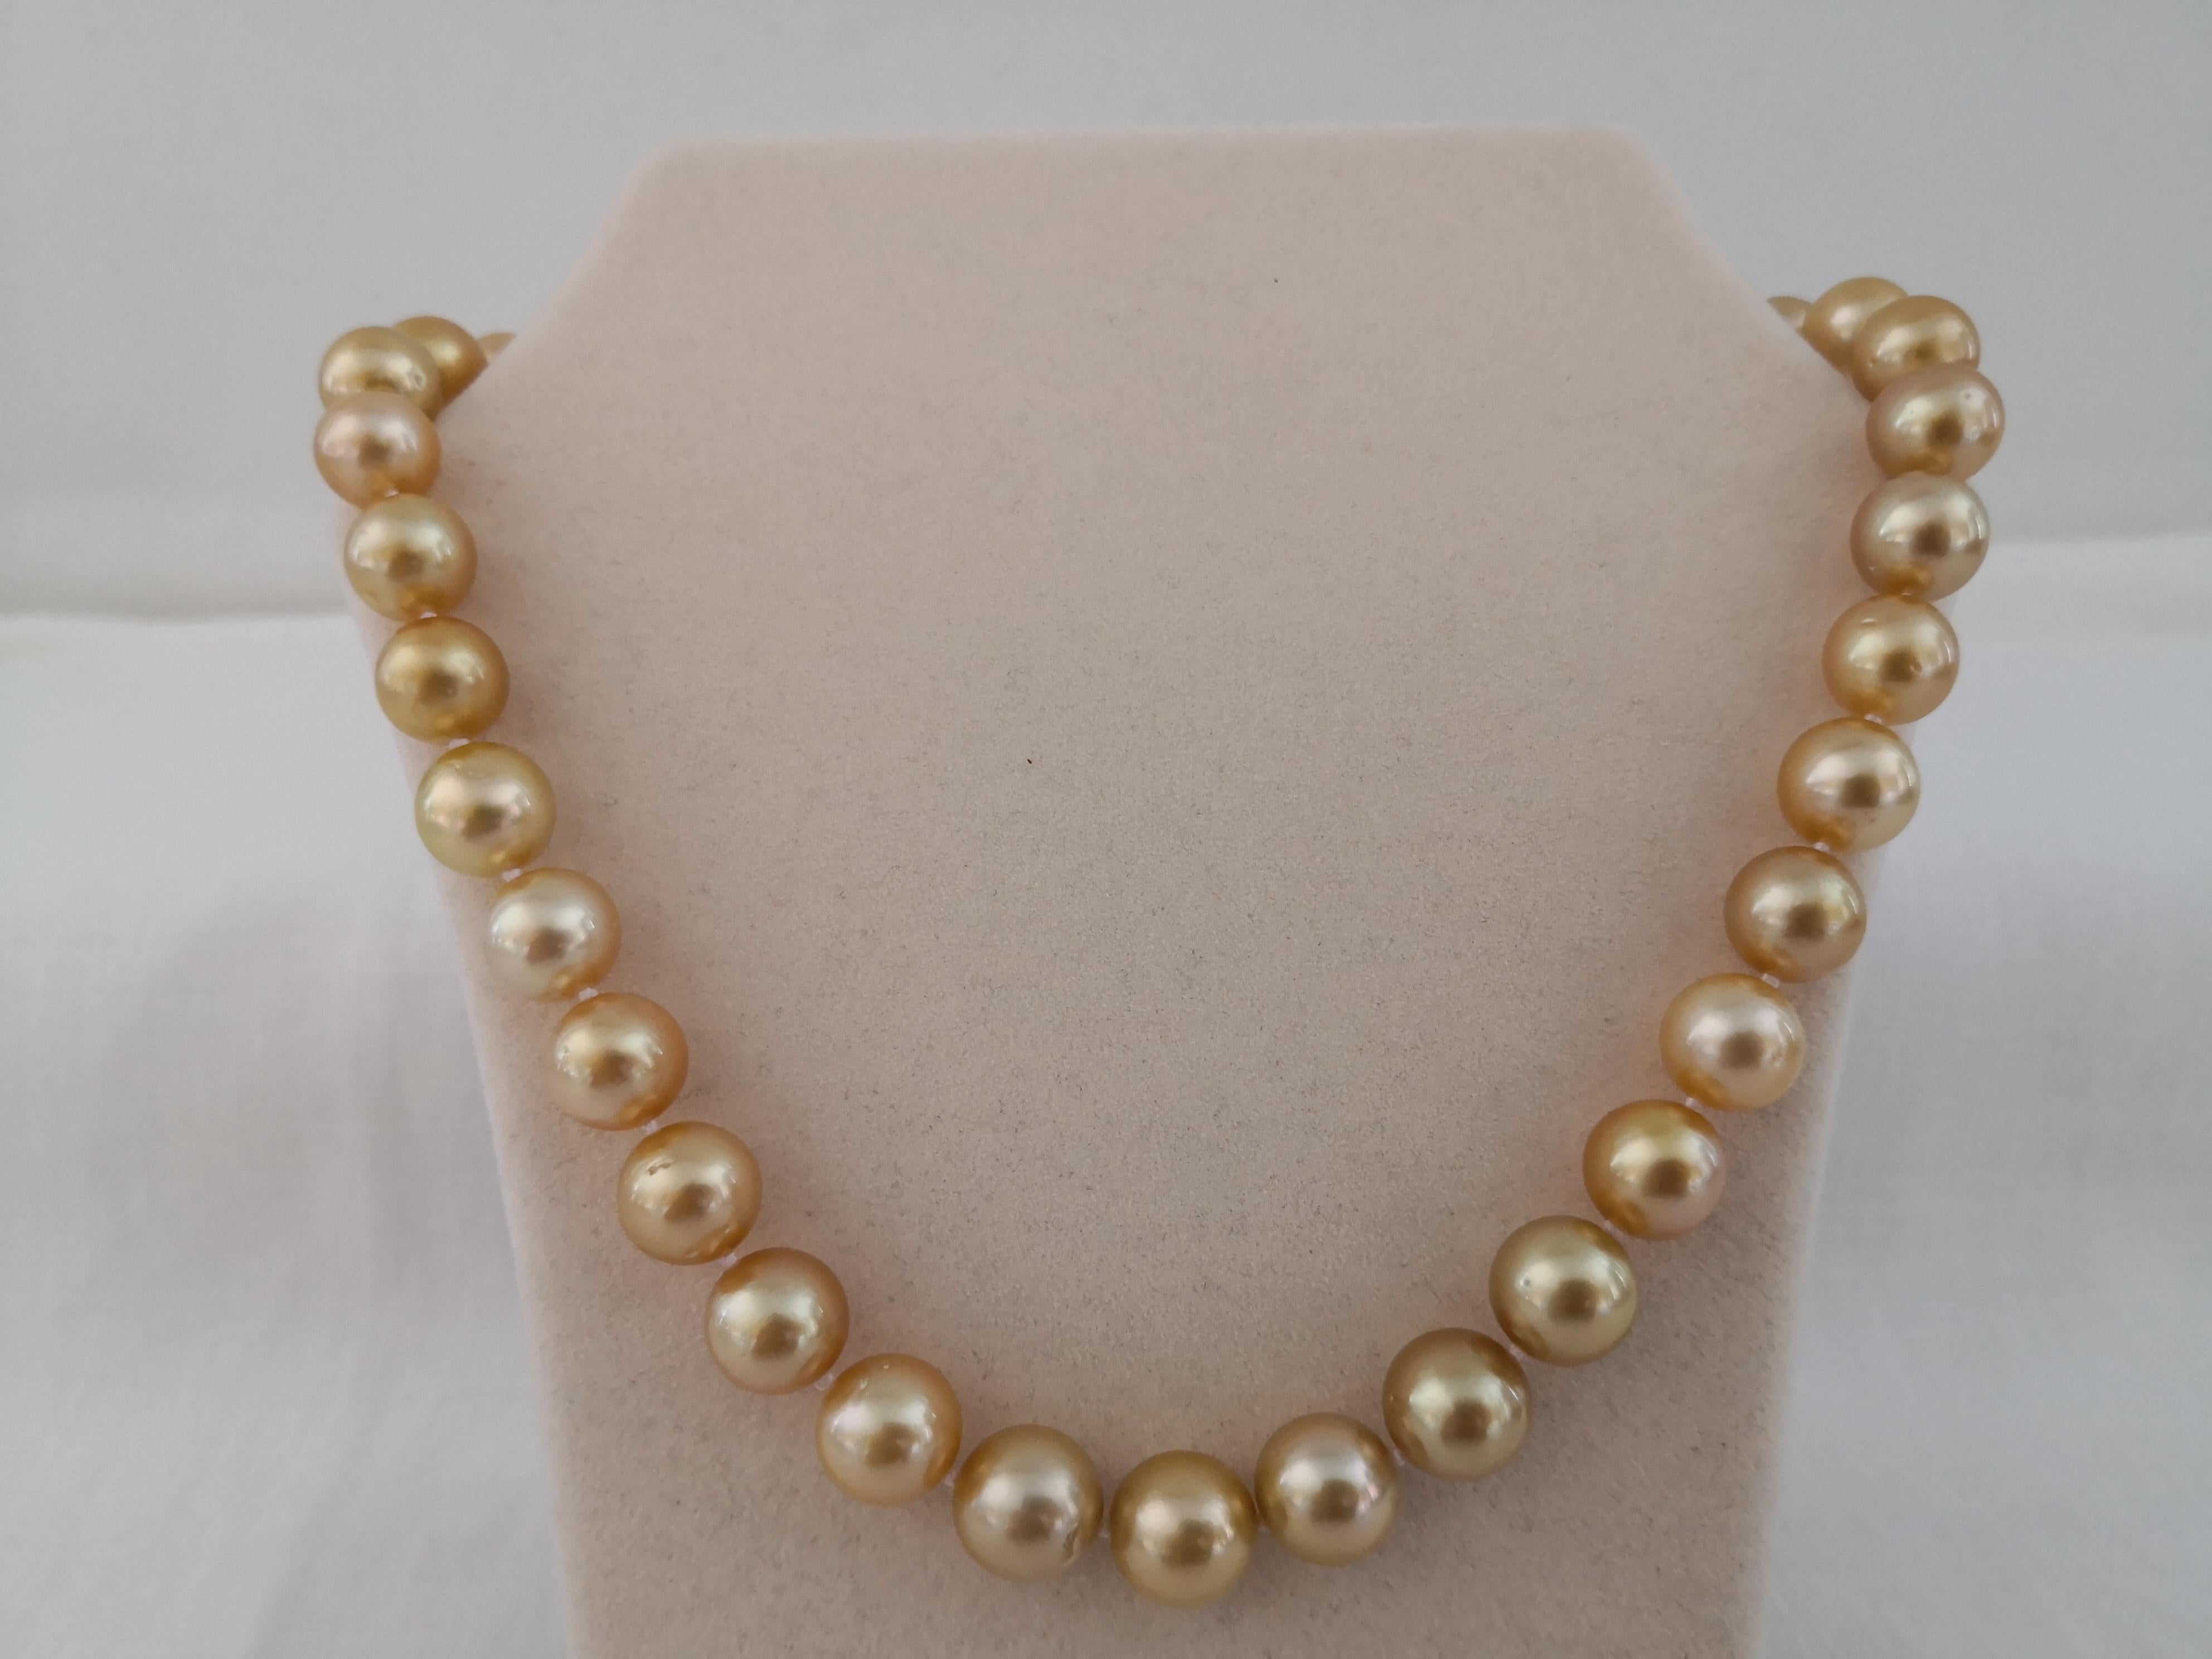 A Natural Color South Sea Pearls, from Indonesia ocean waters. A Deep Golden Color Pearls necklace, This color is rare and unique and is considered the most expensive one among South Sea Pearl. This color is also known as 